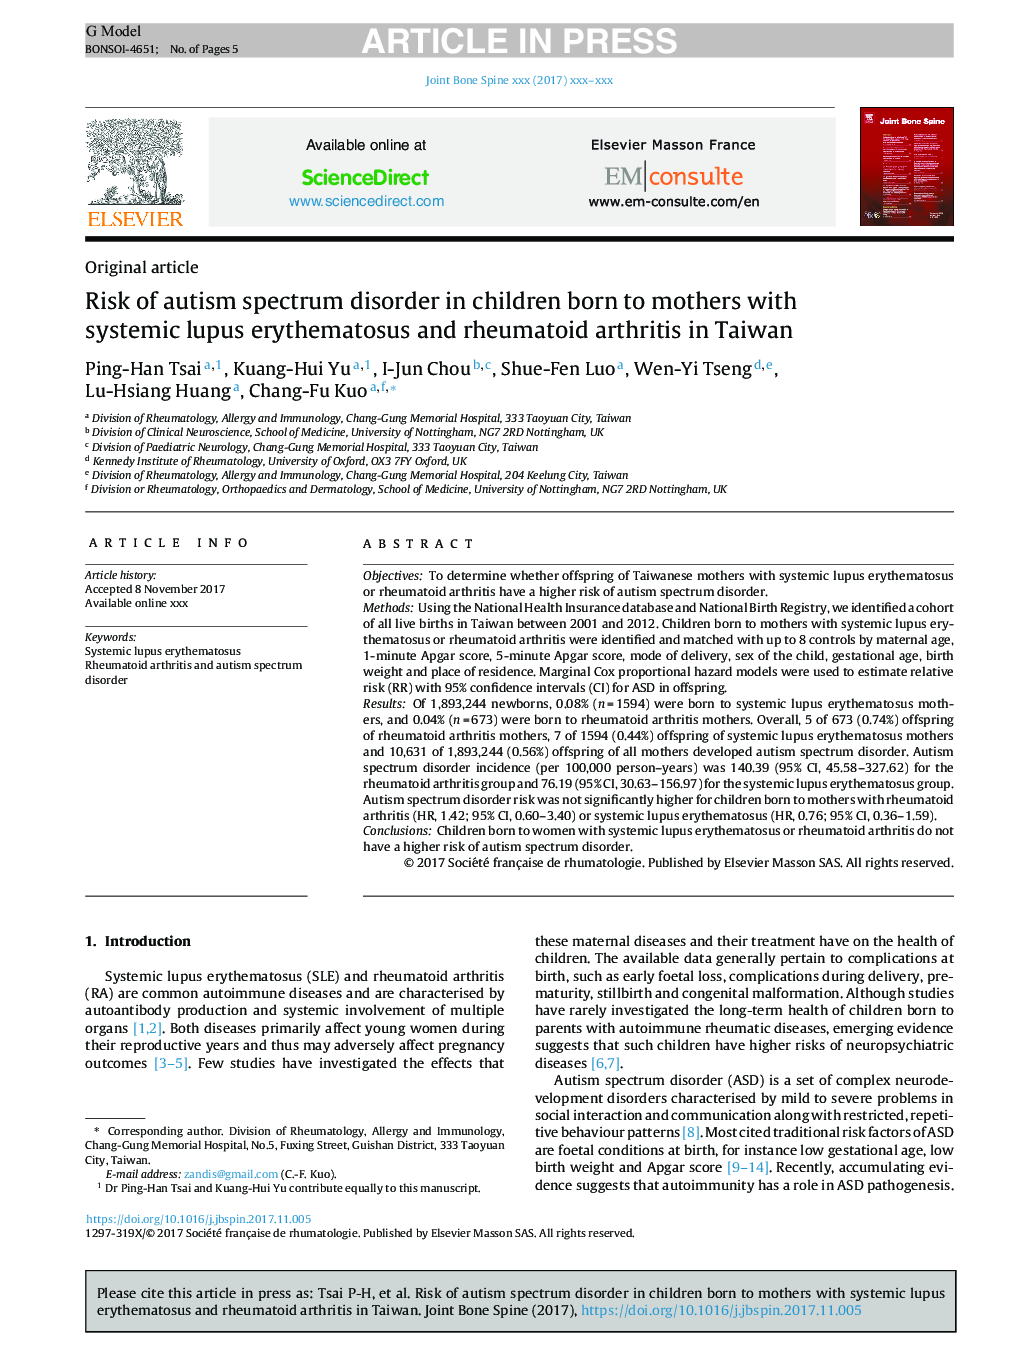 Risk of autism spectrum disorder in children born to mothers with systemic lupus erythematosus and rheumatoid arthritis in Taiwan